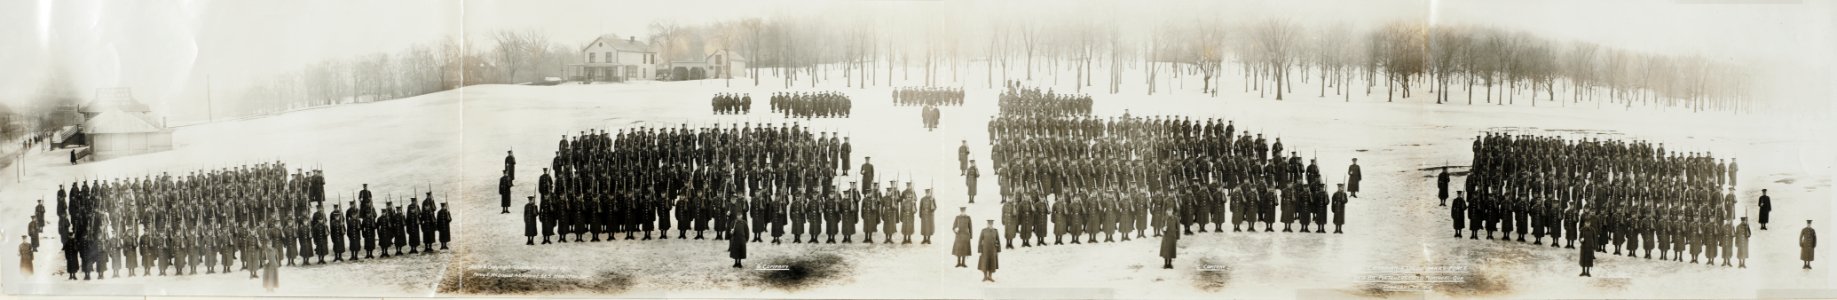 2nd Canadian Expeditionary Force 24th Battalion Montreal, Feb. 22, 1915. Arms sloped (HS85-10-30046) photo